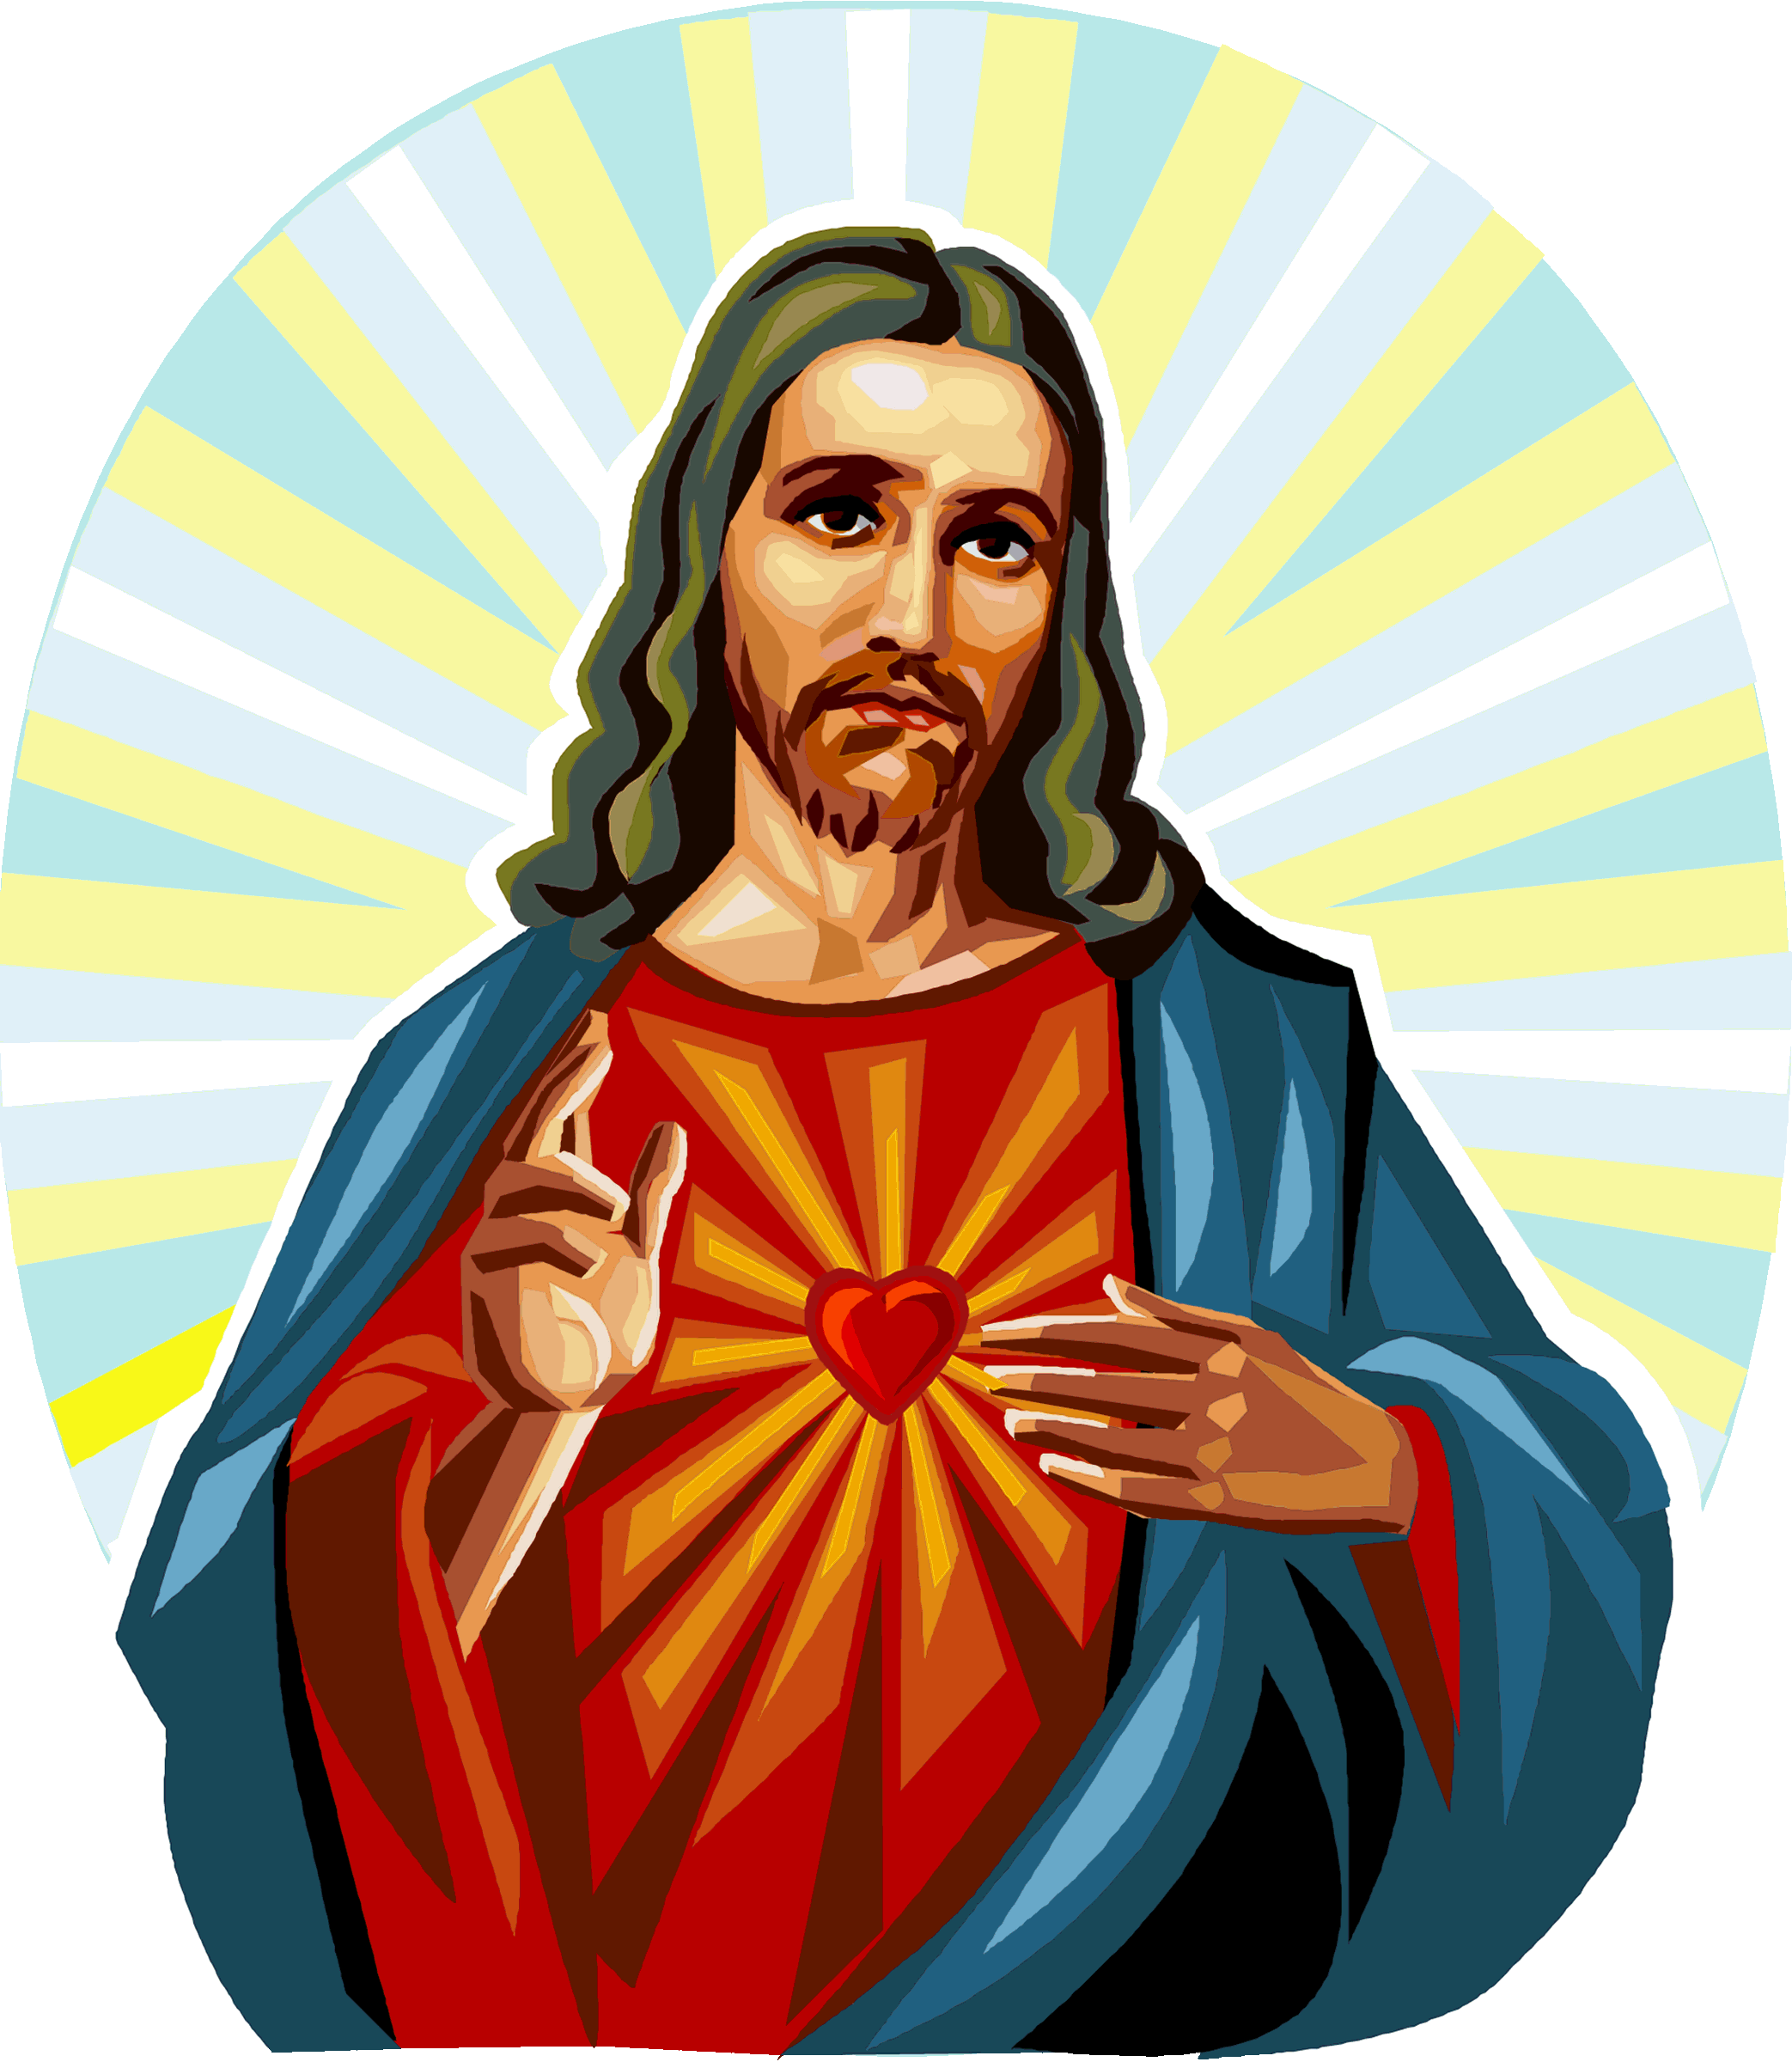 free christian clipart of jesus - photo #43